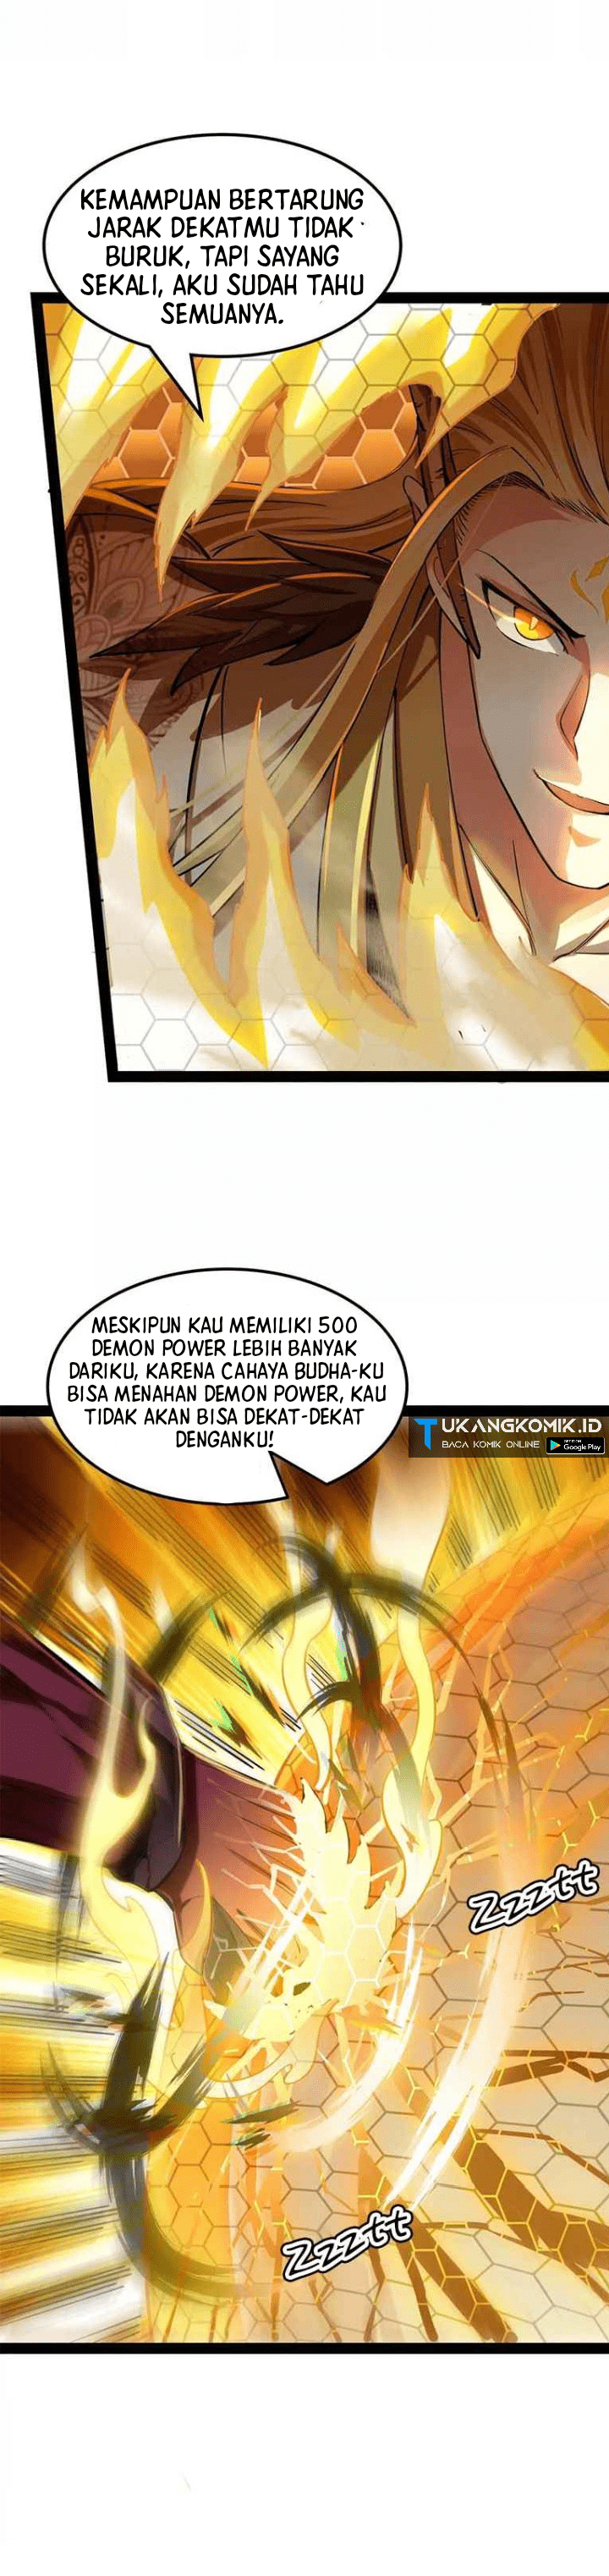 i-am-the-king Chapter 24